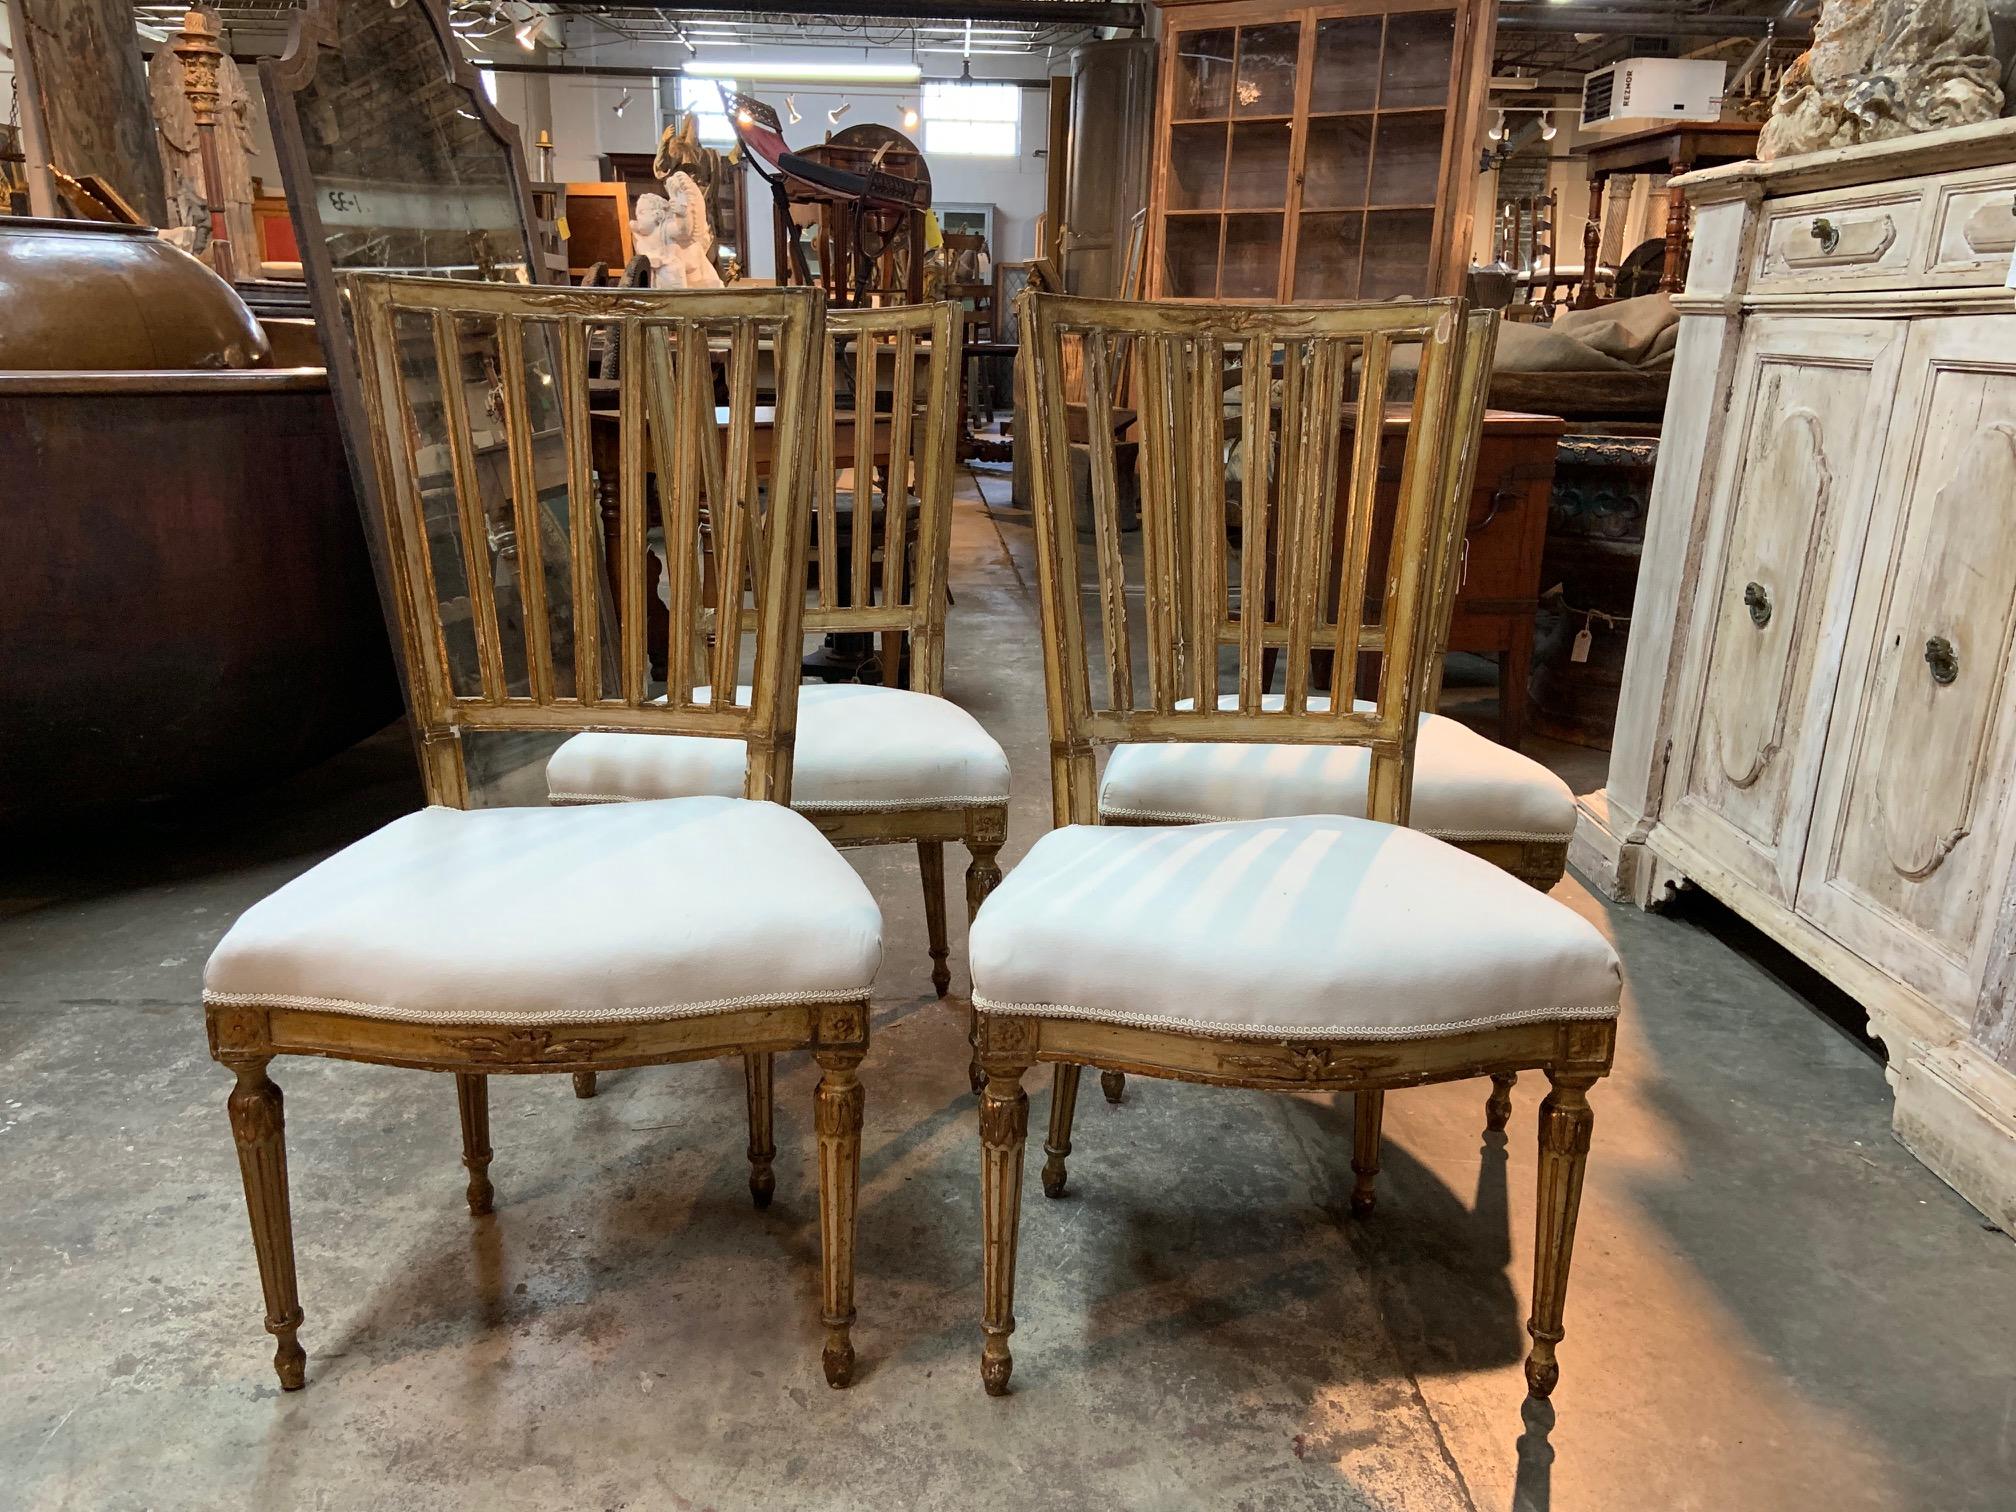 A wonderful Italian Louis XVI period set of four side chairs soundly constructed in polychromed and gilt wood. Original polychromed and gilt finish with sensational patina.